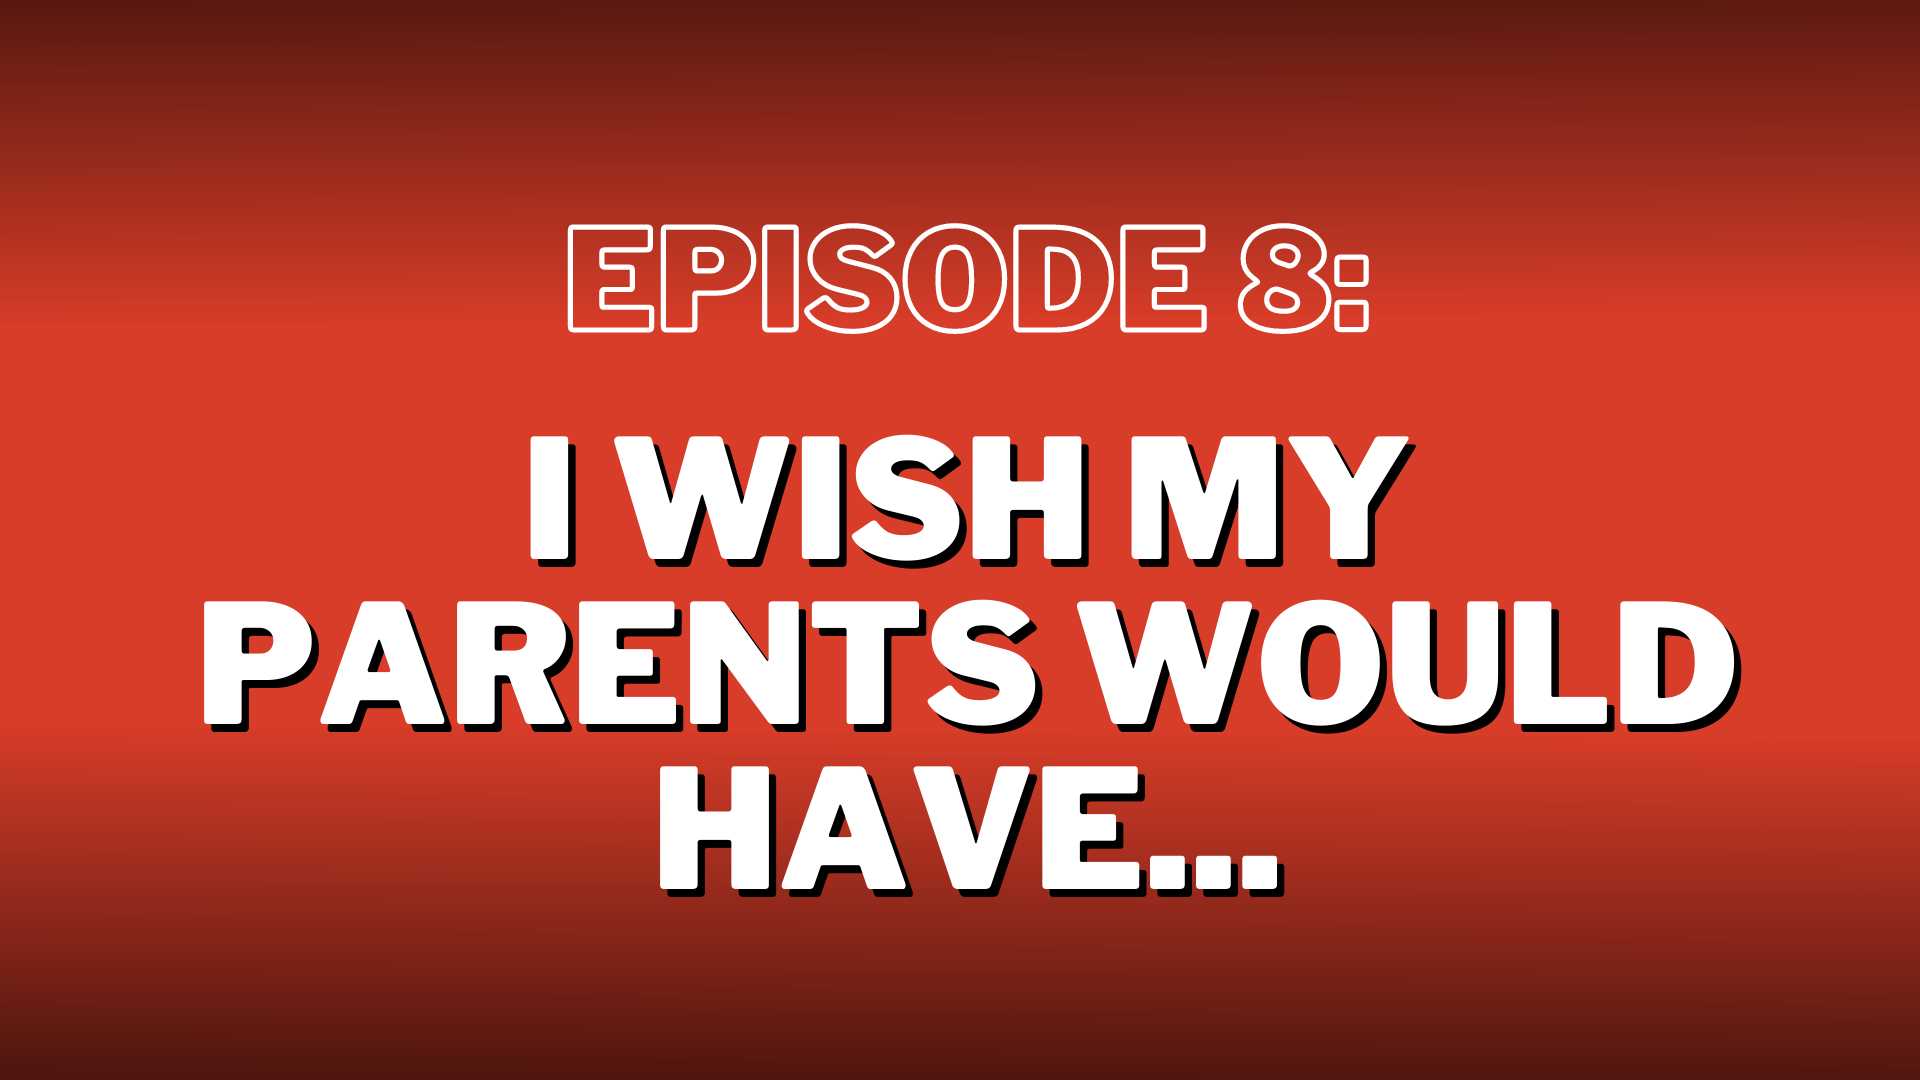 S3. Episode 8: I Wish My Parents Would Have… – Show Notes